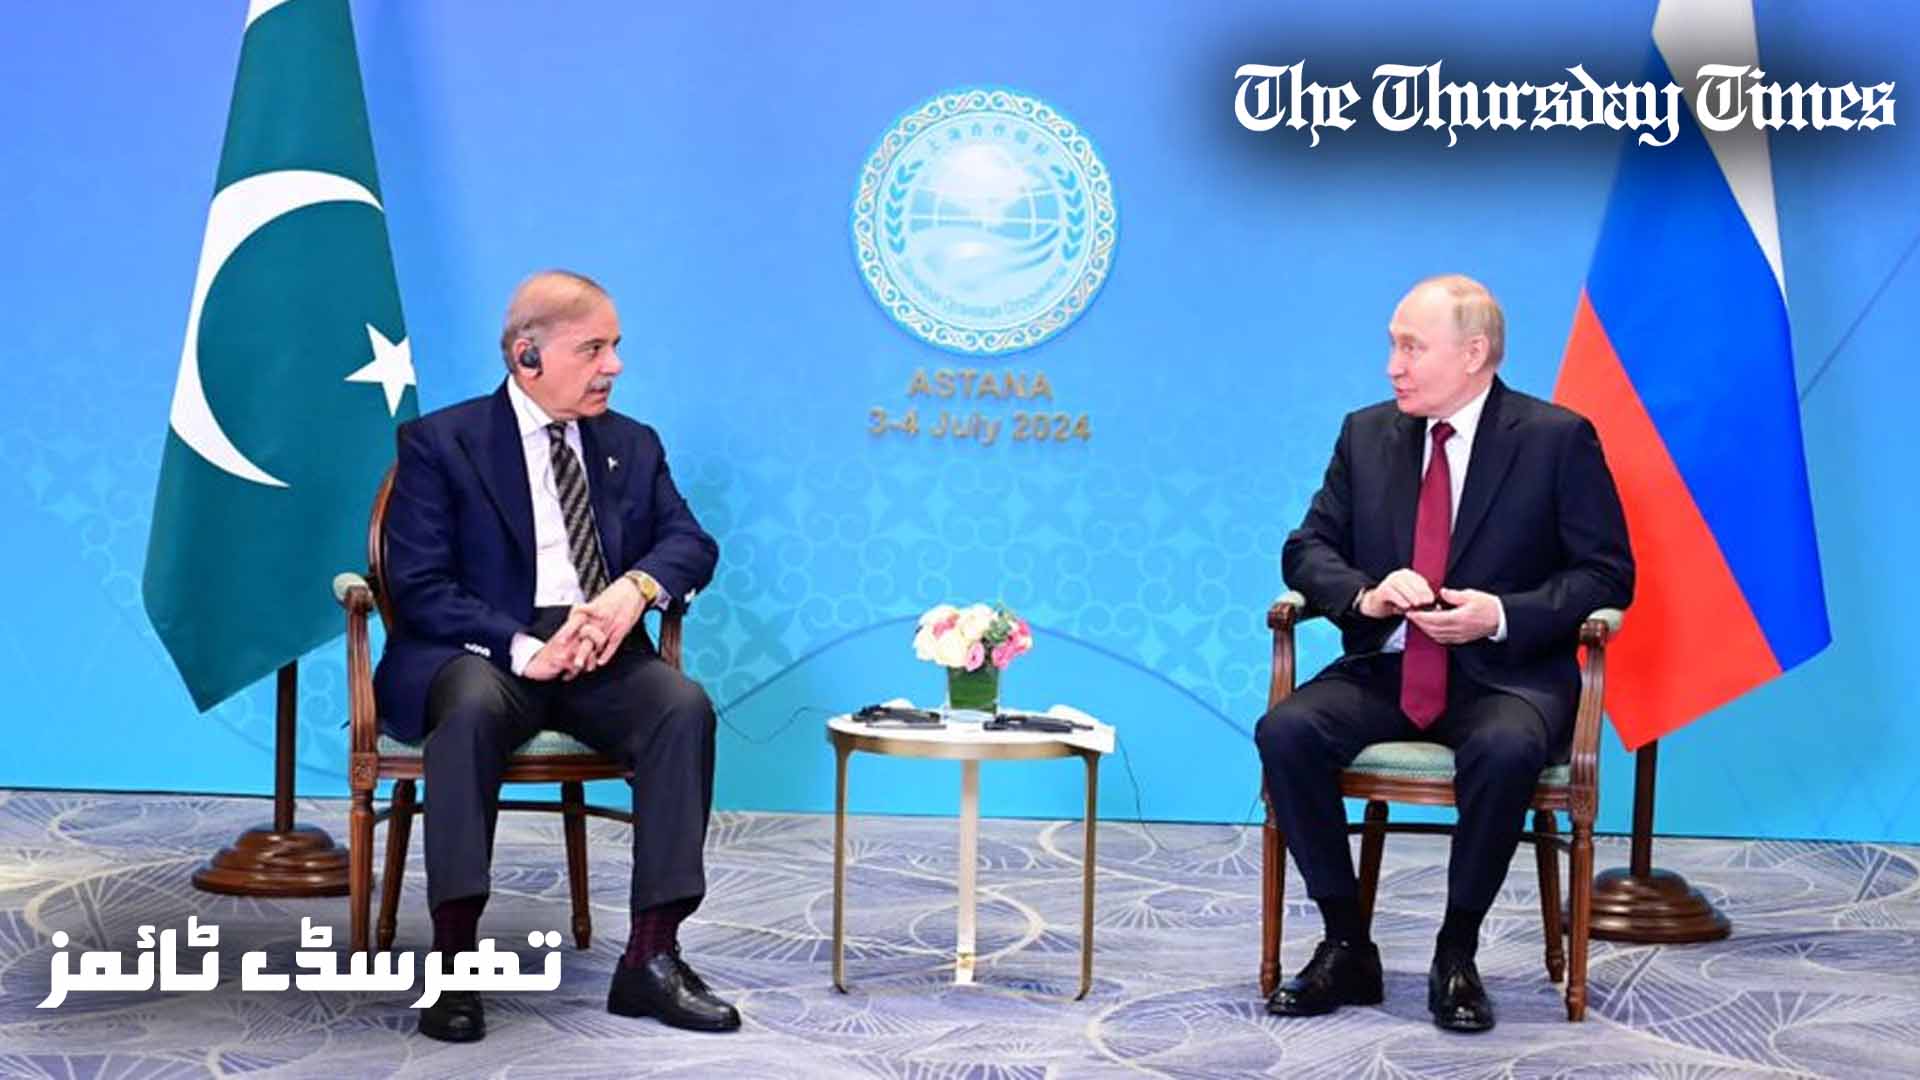 A file photo is shown of Pakistani prime minister Shehbaz Sharif (L) and his Russian counterpart, Vladimir Putin (R). — MONTAGE/THE THURSDAY TIMES